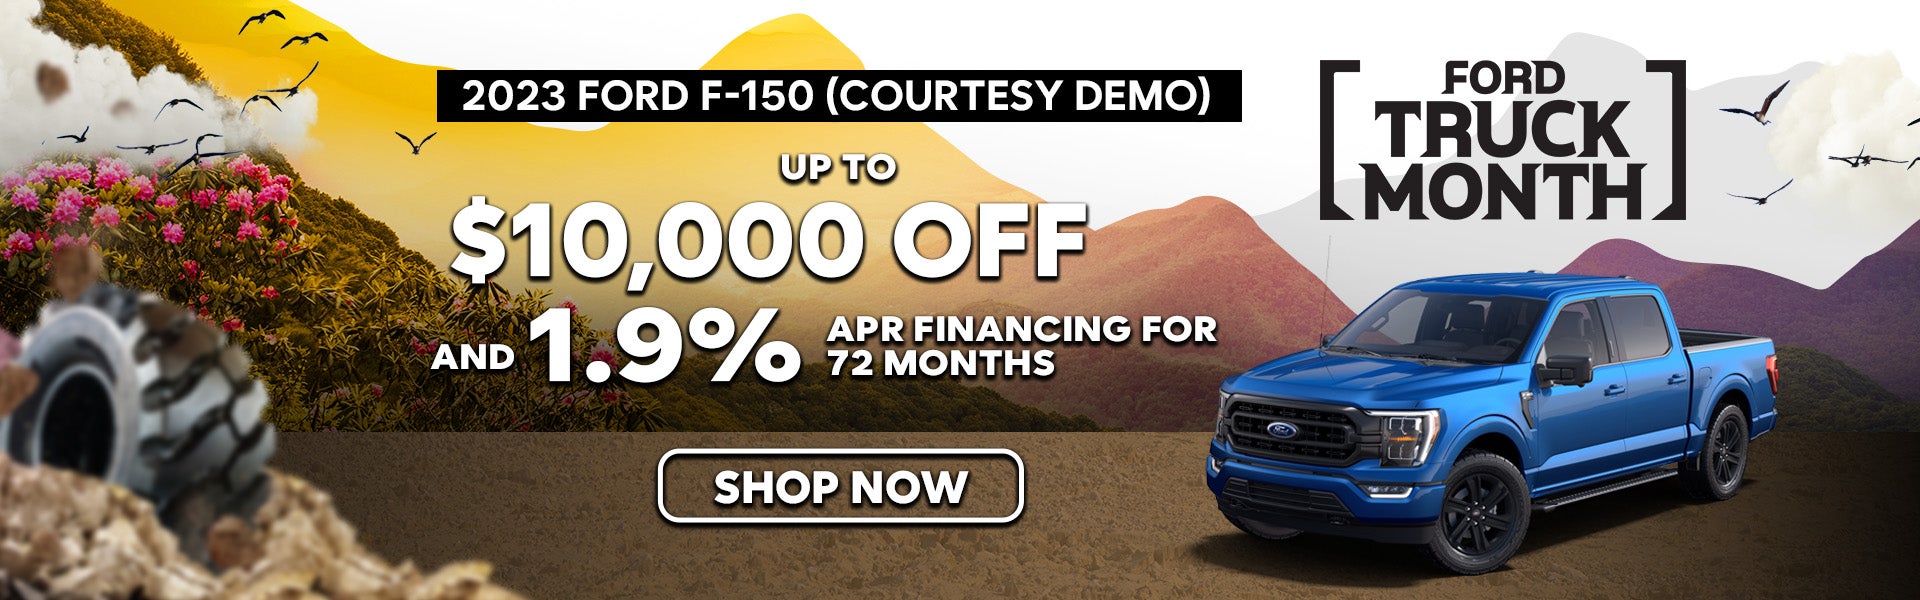 2023 Ford F-150 Courtesy Vehicle Special Offer